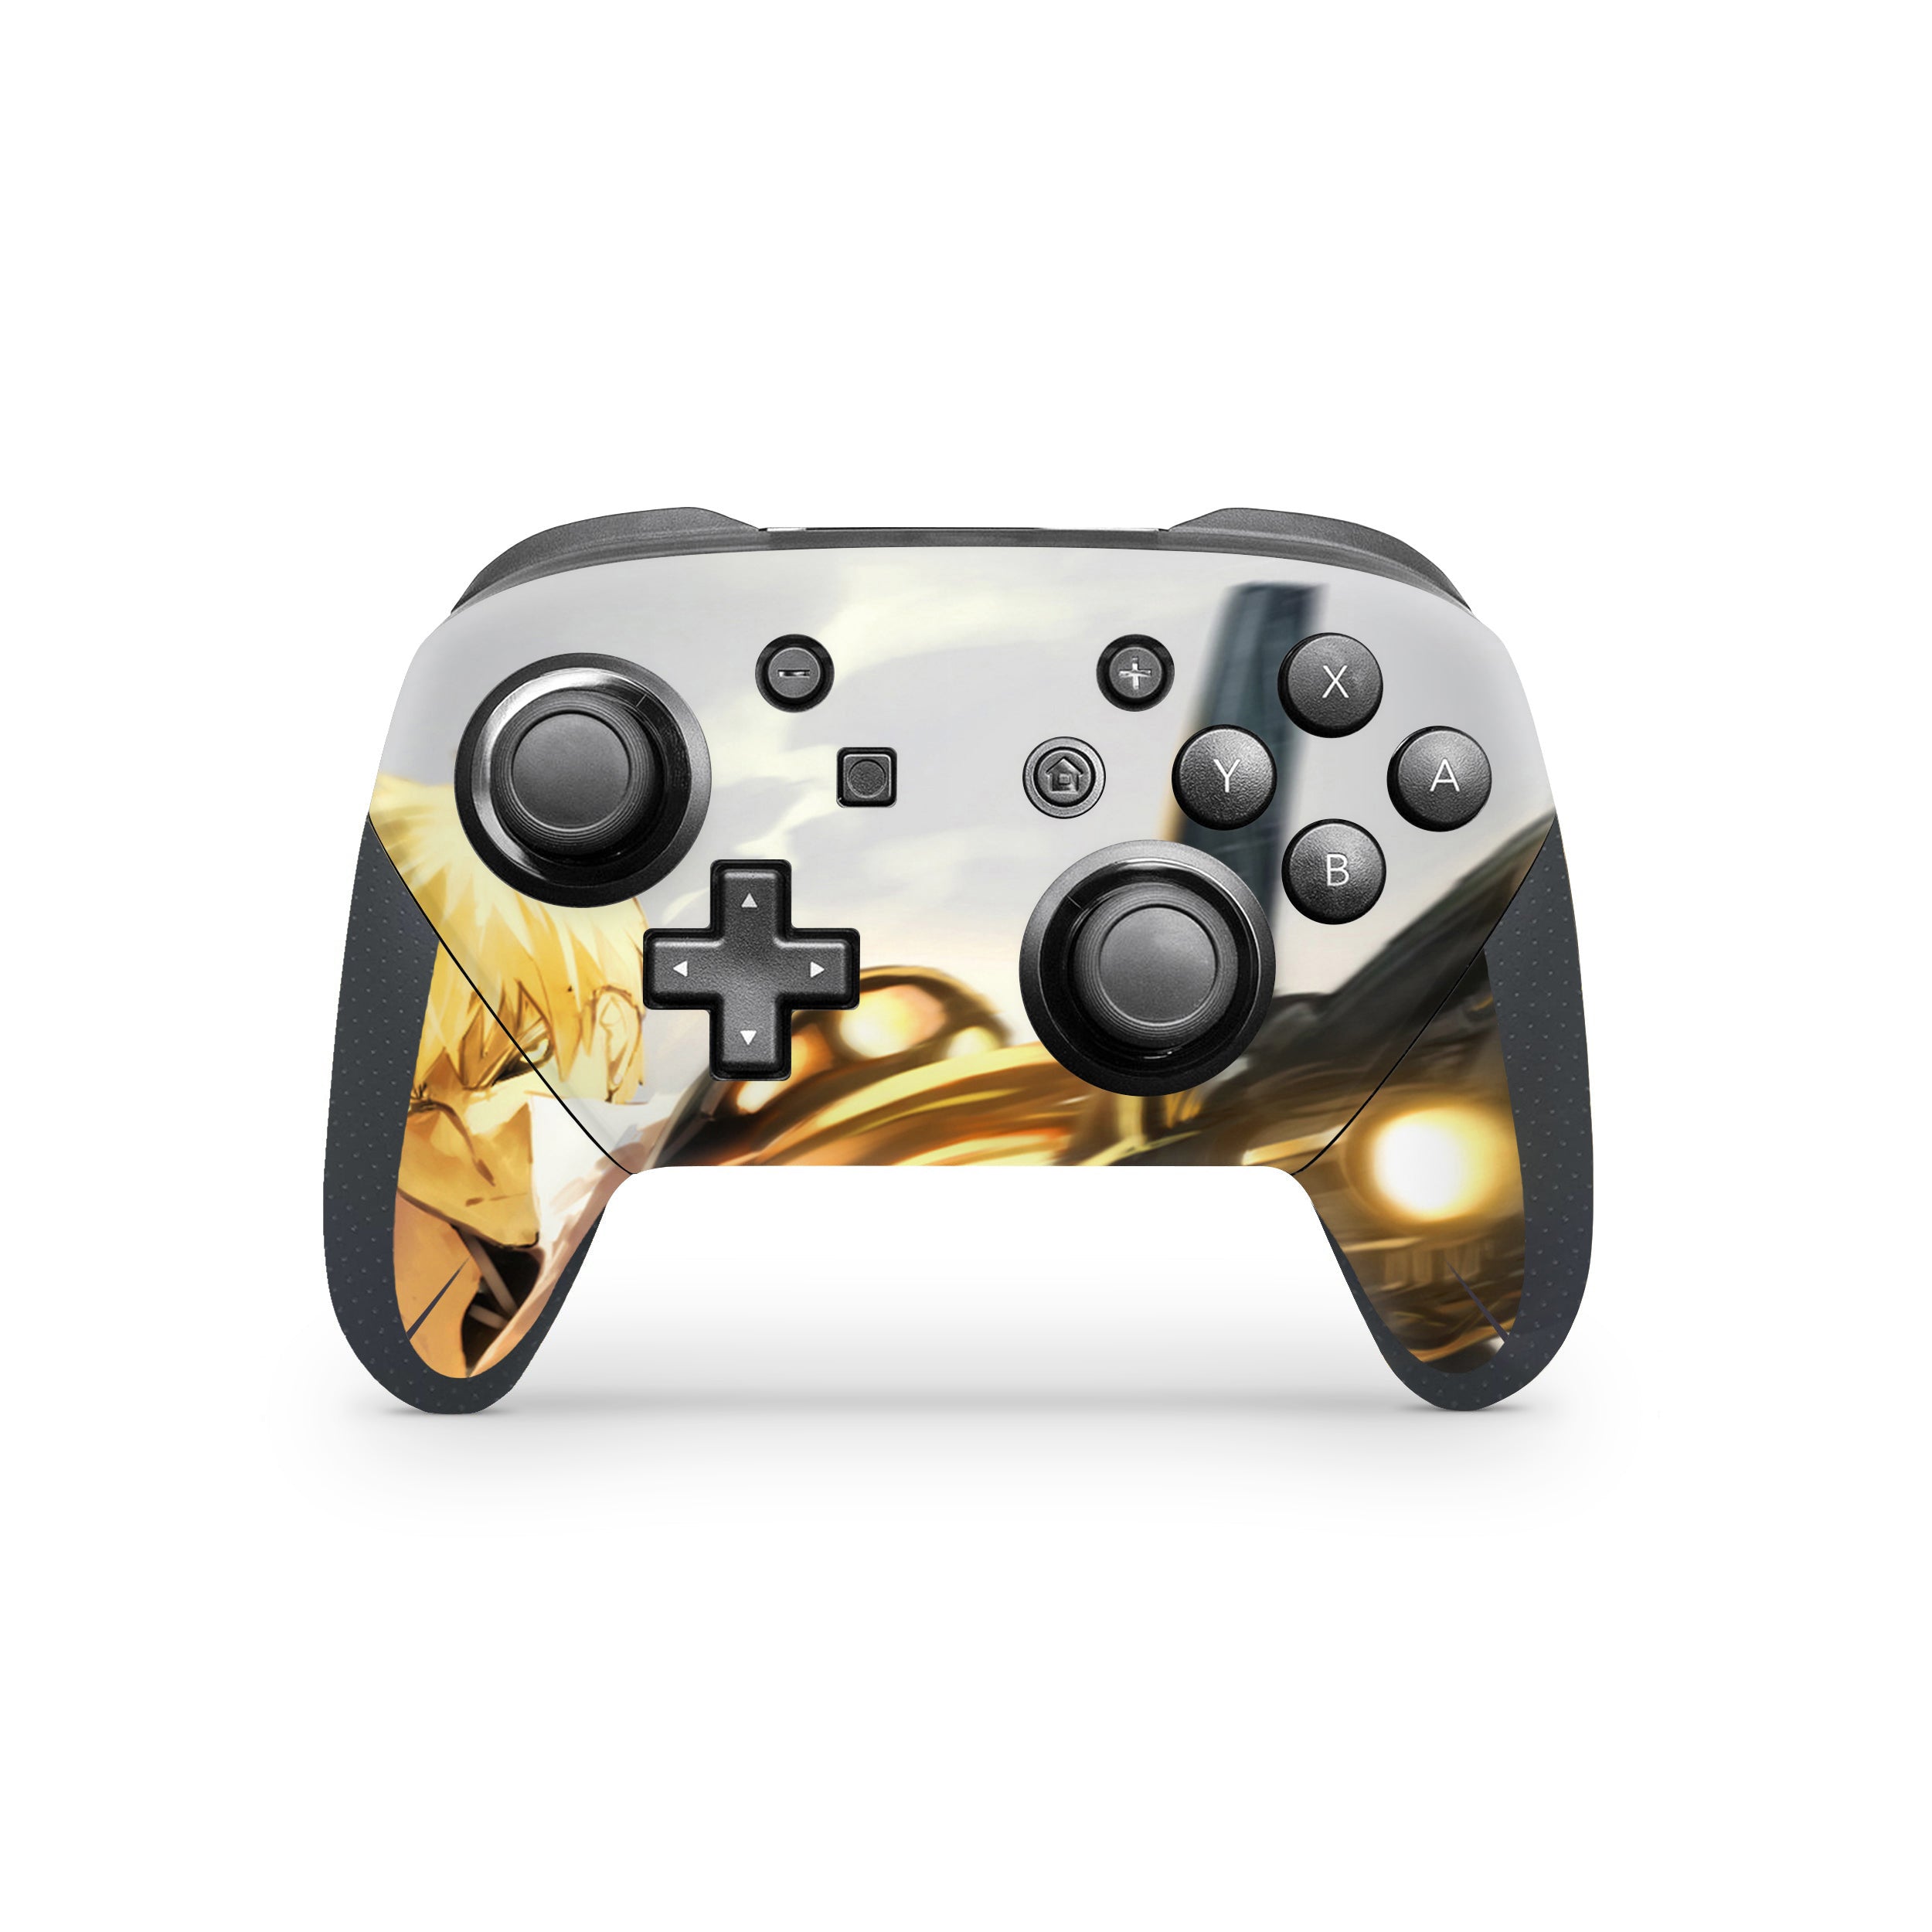 A video game skin featuring a One Punch Man Genos design for the Switch Pro Controller.